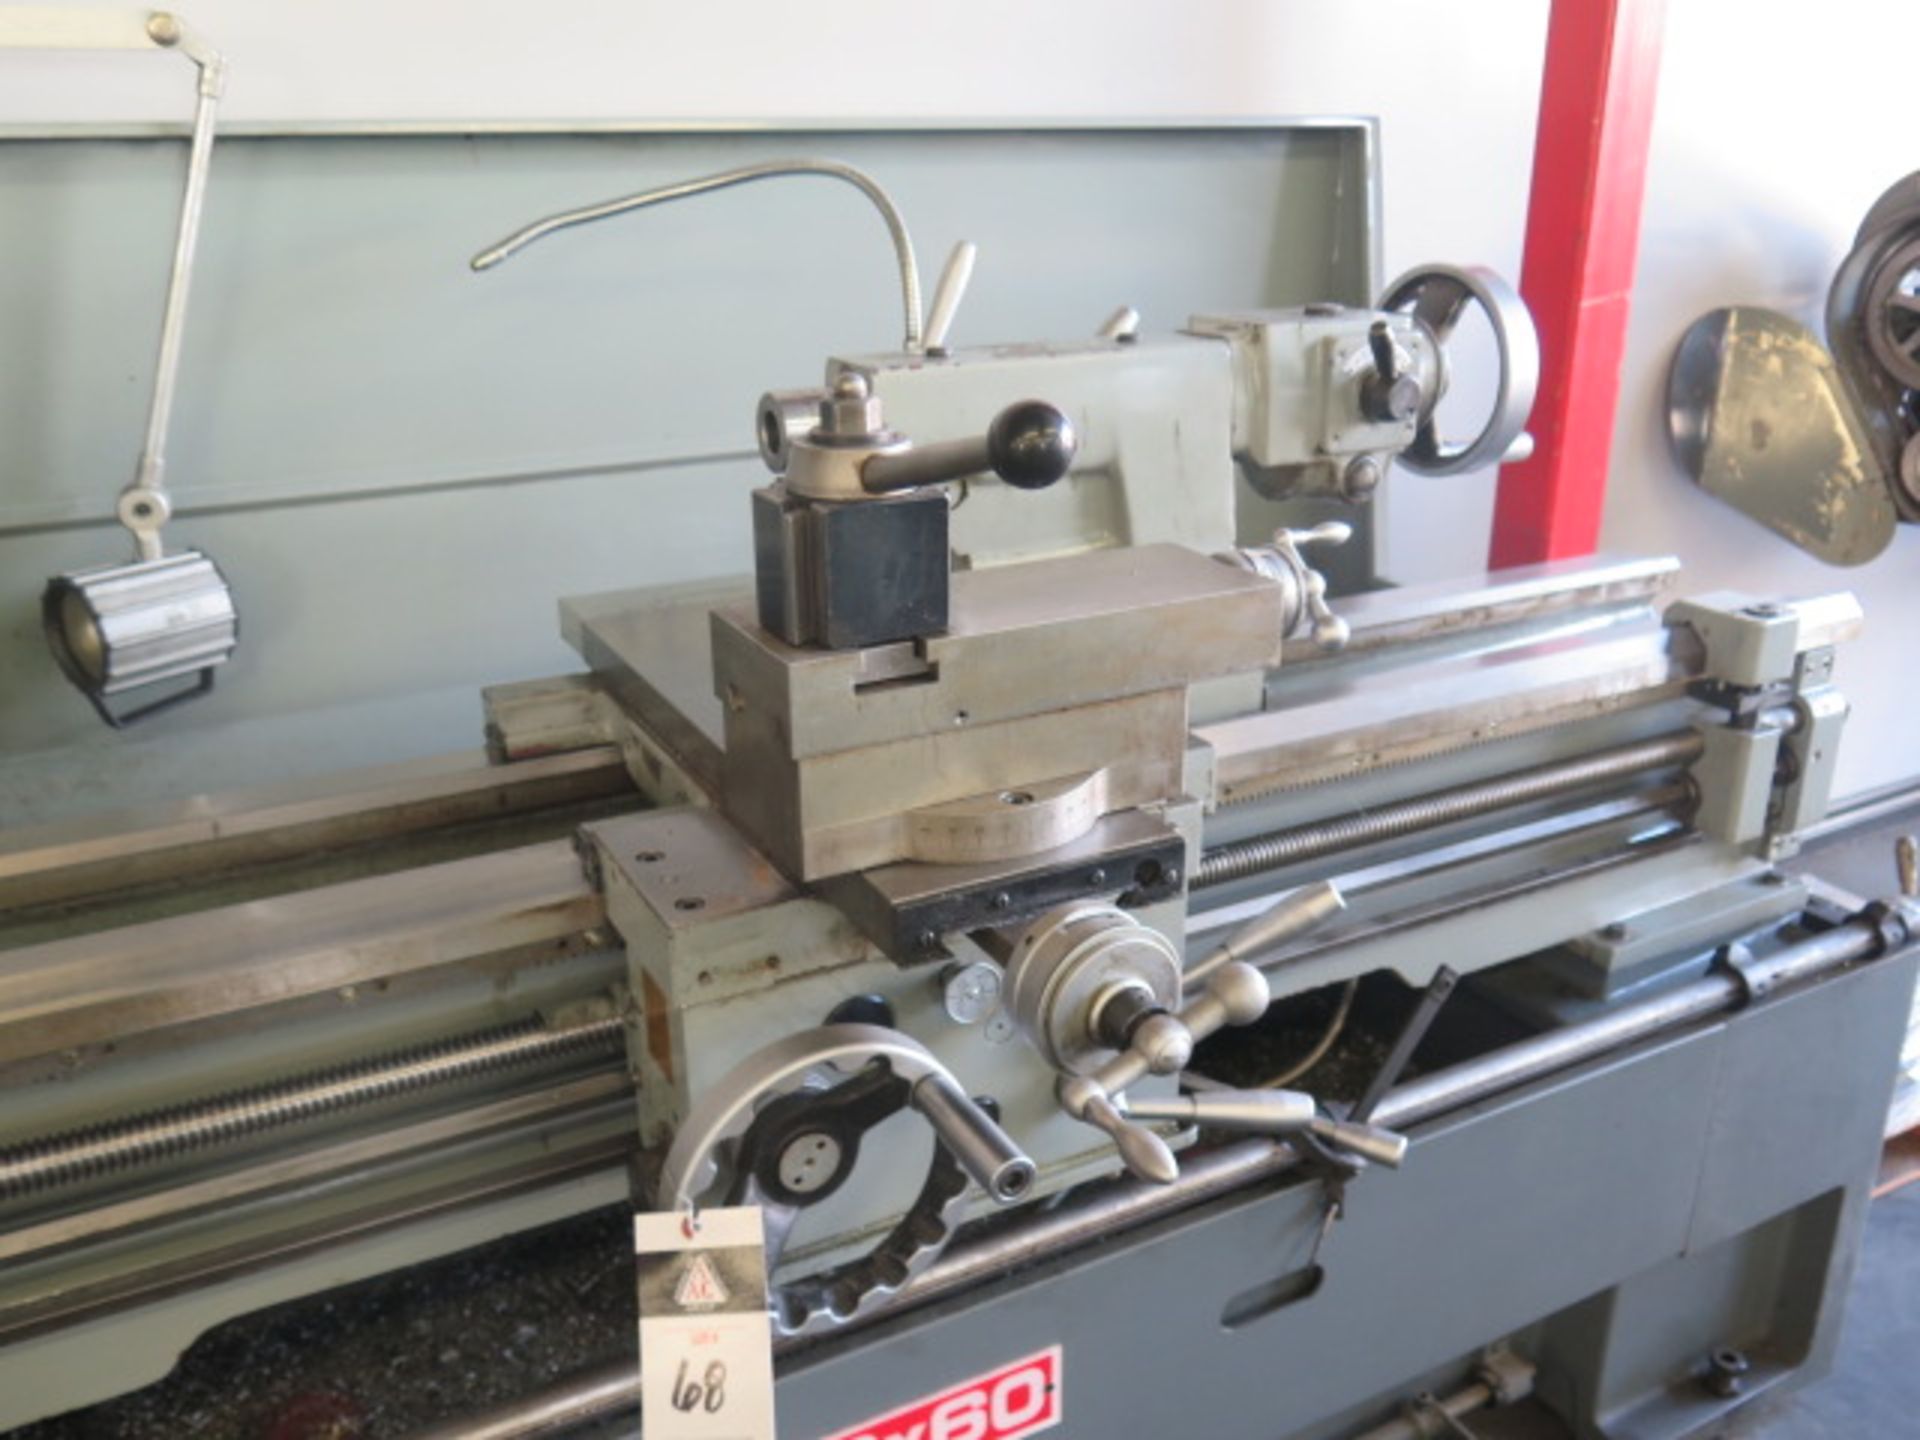 Kent ML-20x60 20” x 60” Geared Head Gap Bed Lathe w/ Acu-Rite Prog DRO, 36-1800 RPM, SOLD AS IS - Image 10 of 17